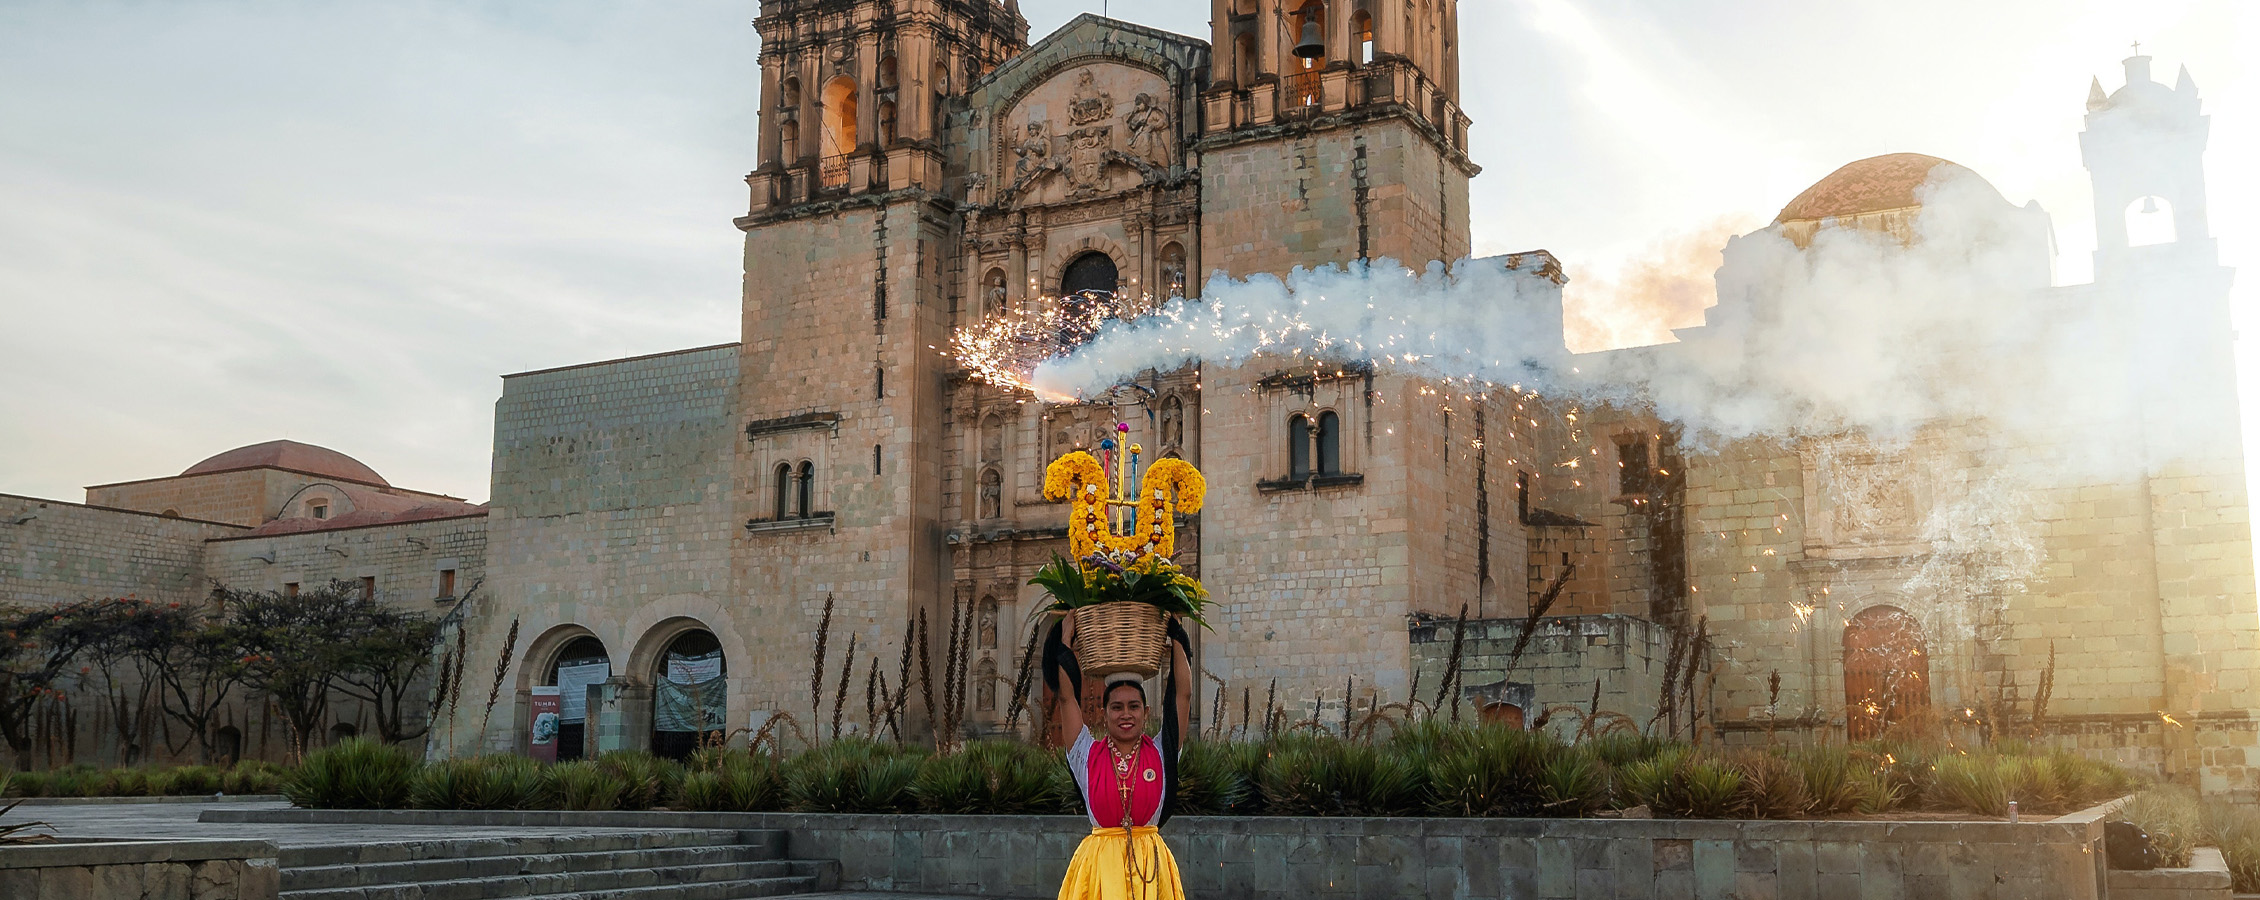 A person stands in front of a church in Mexico.